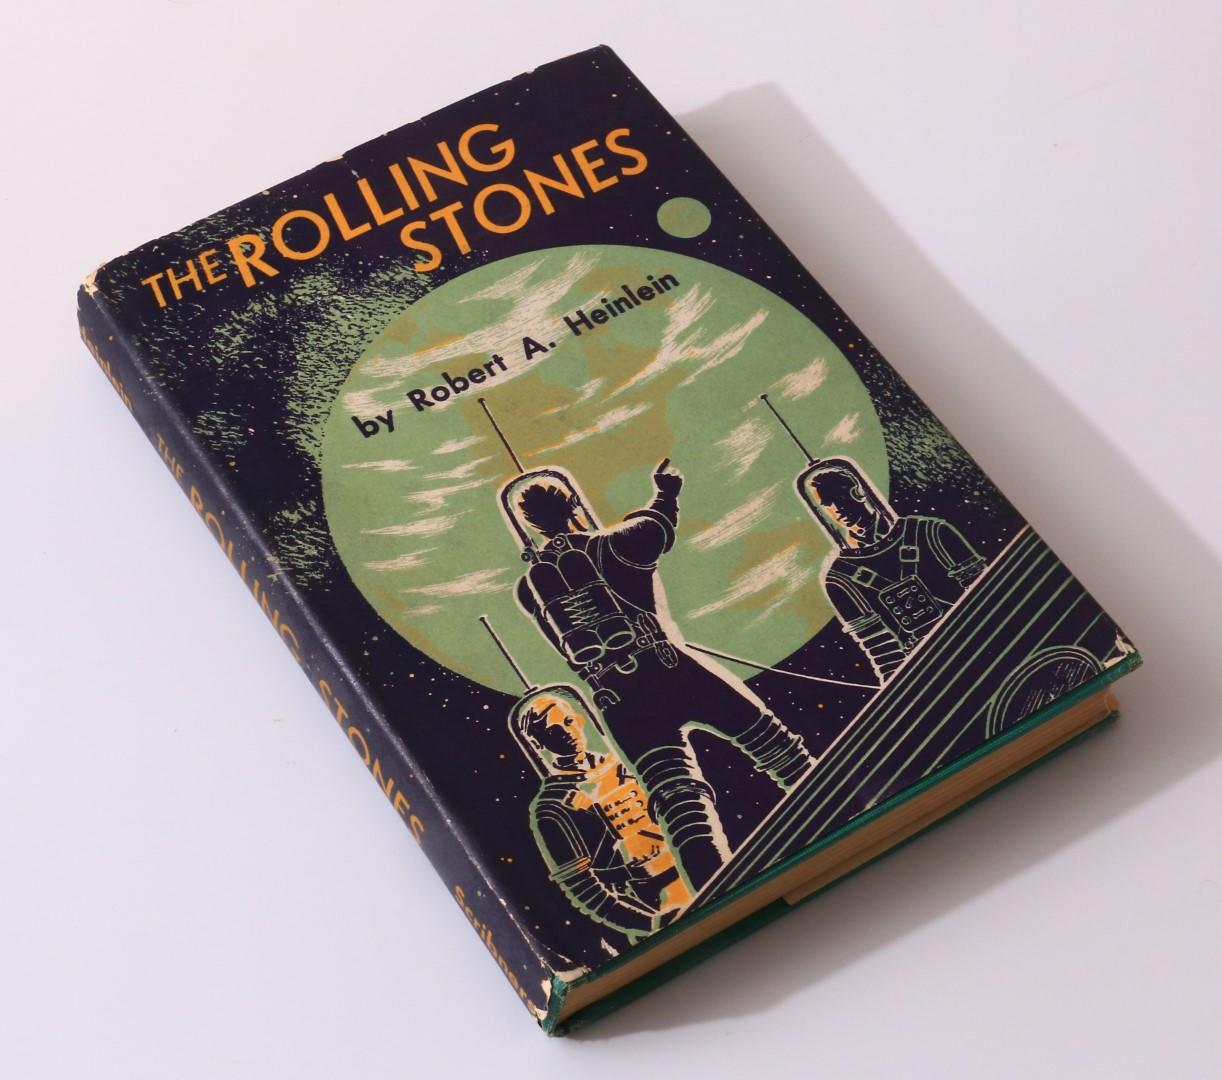 Robert A. Heinlein - The Rolling Stones - Scribners, 1952, First Edition.